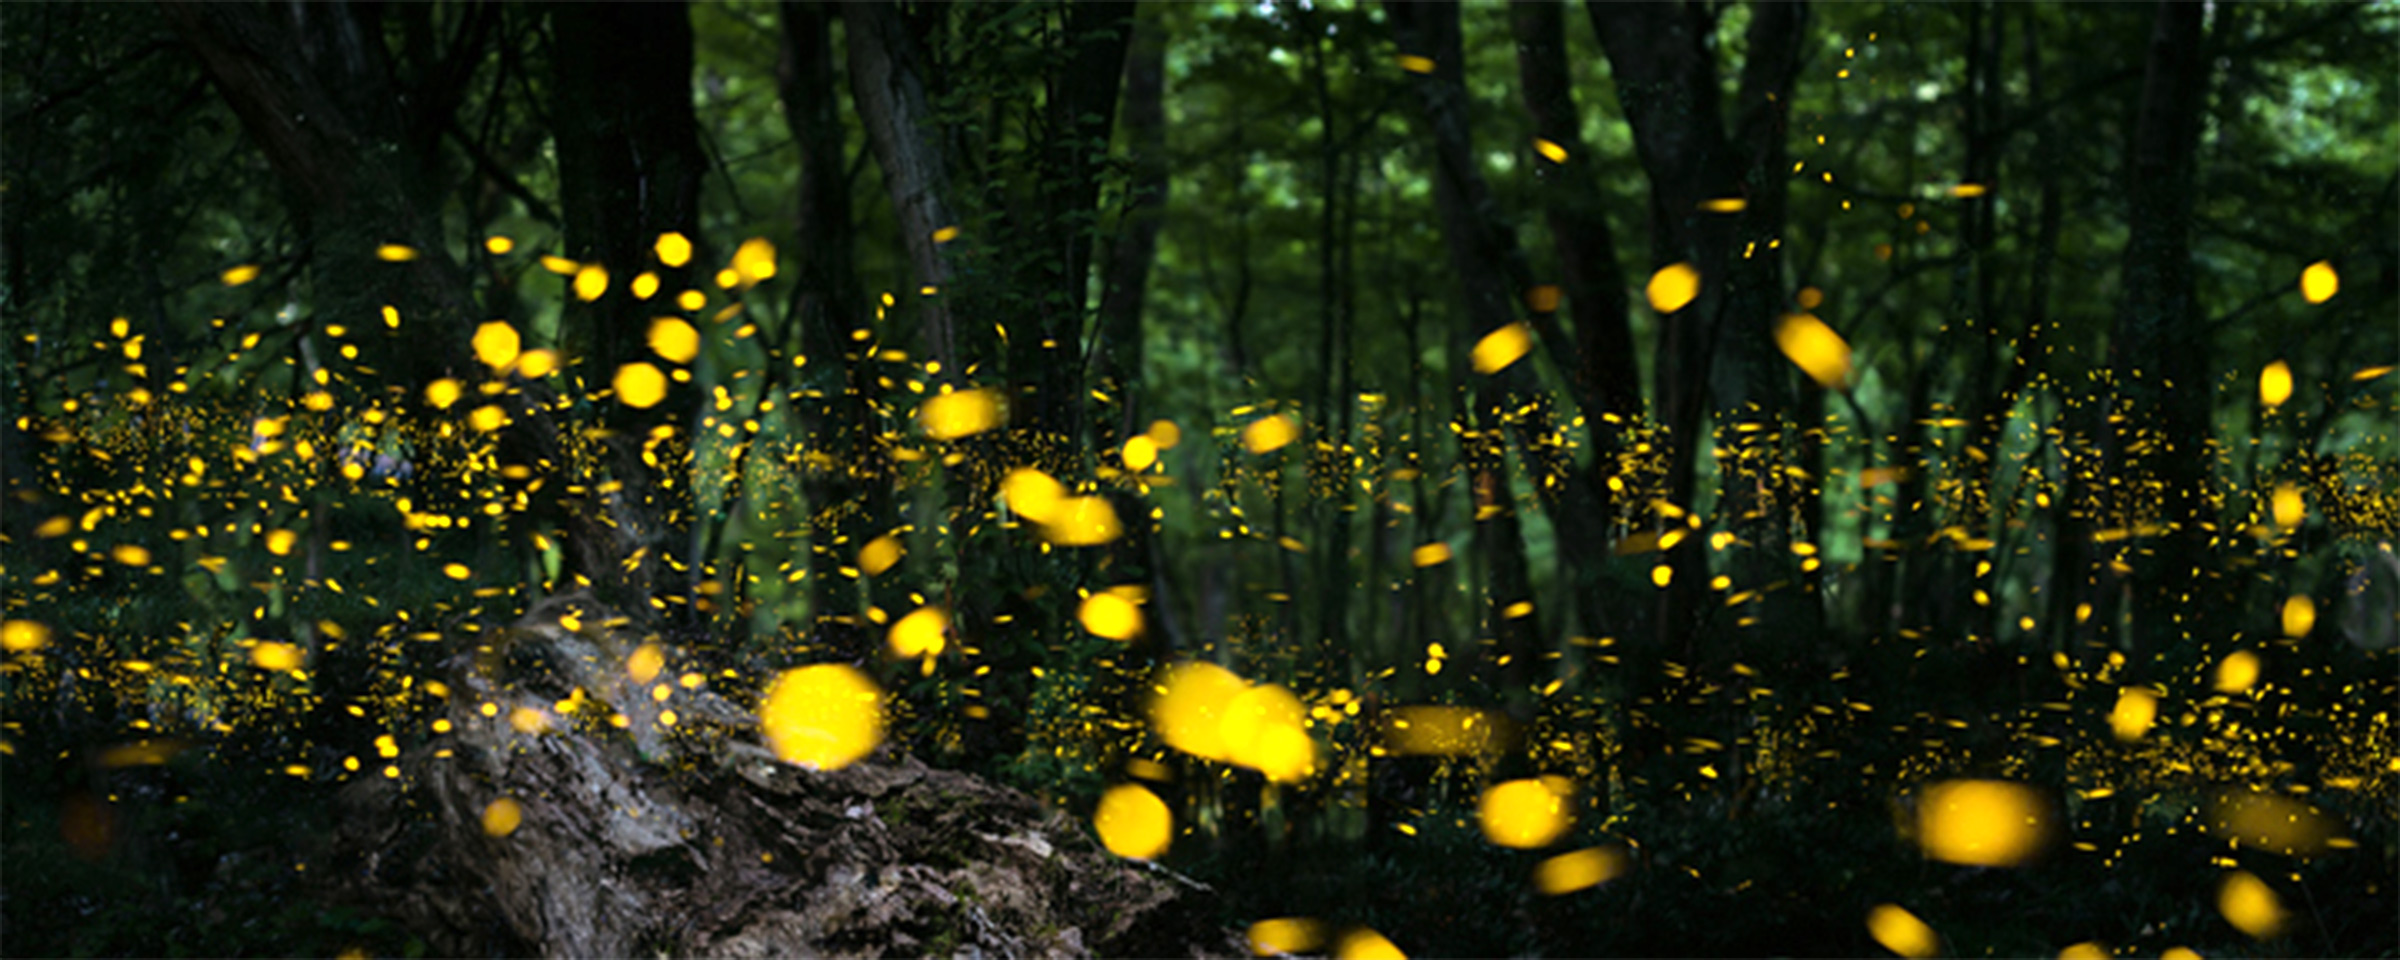 Blurry fireflies in the woods